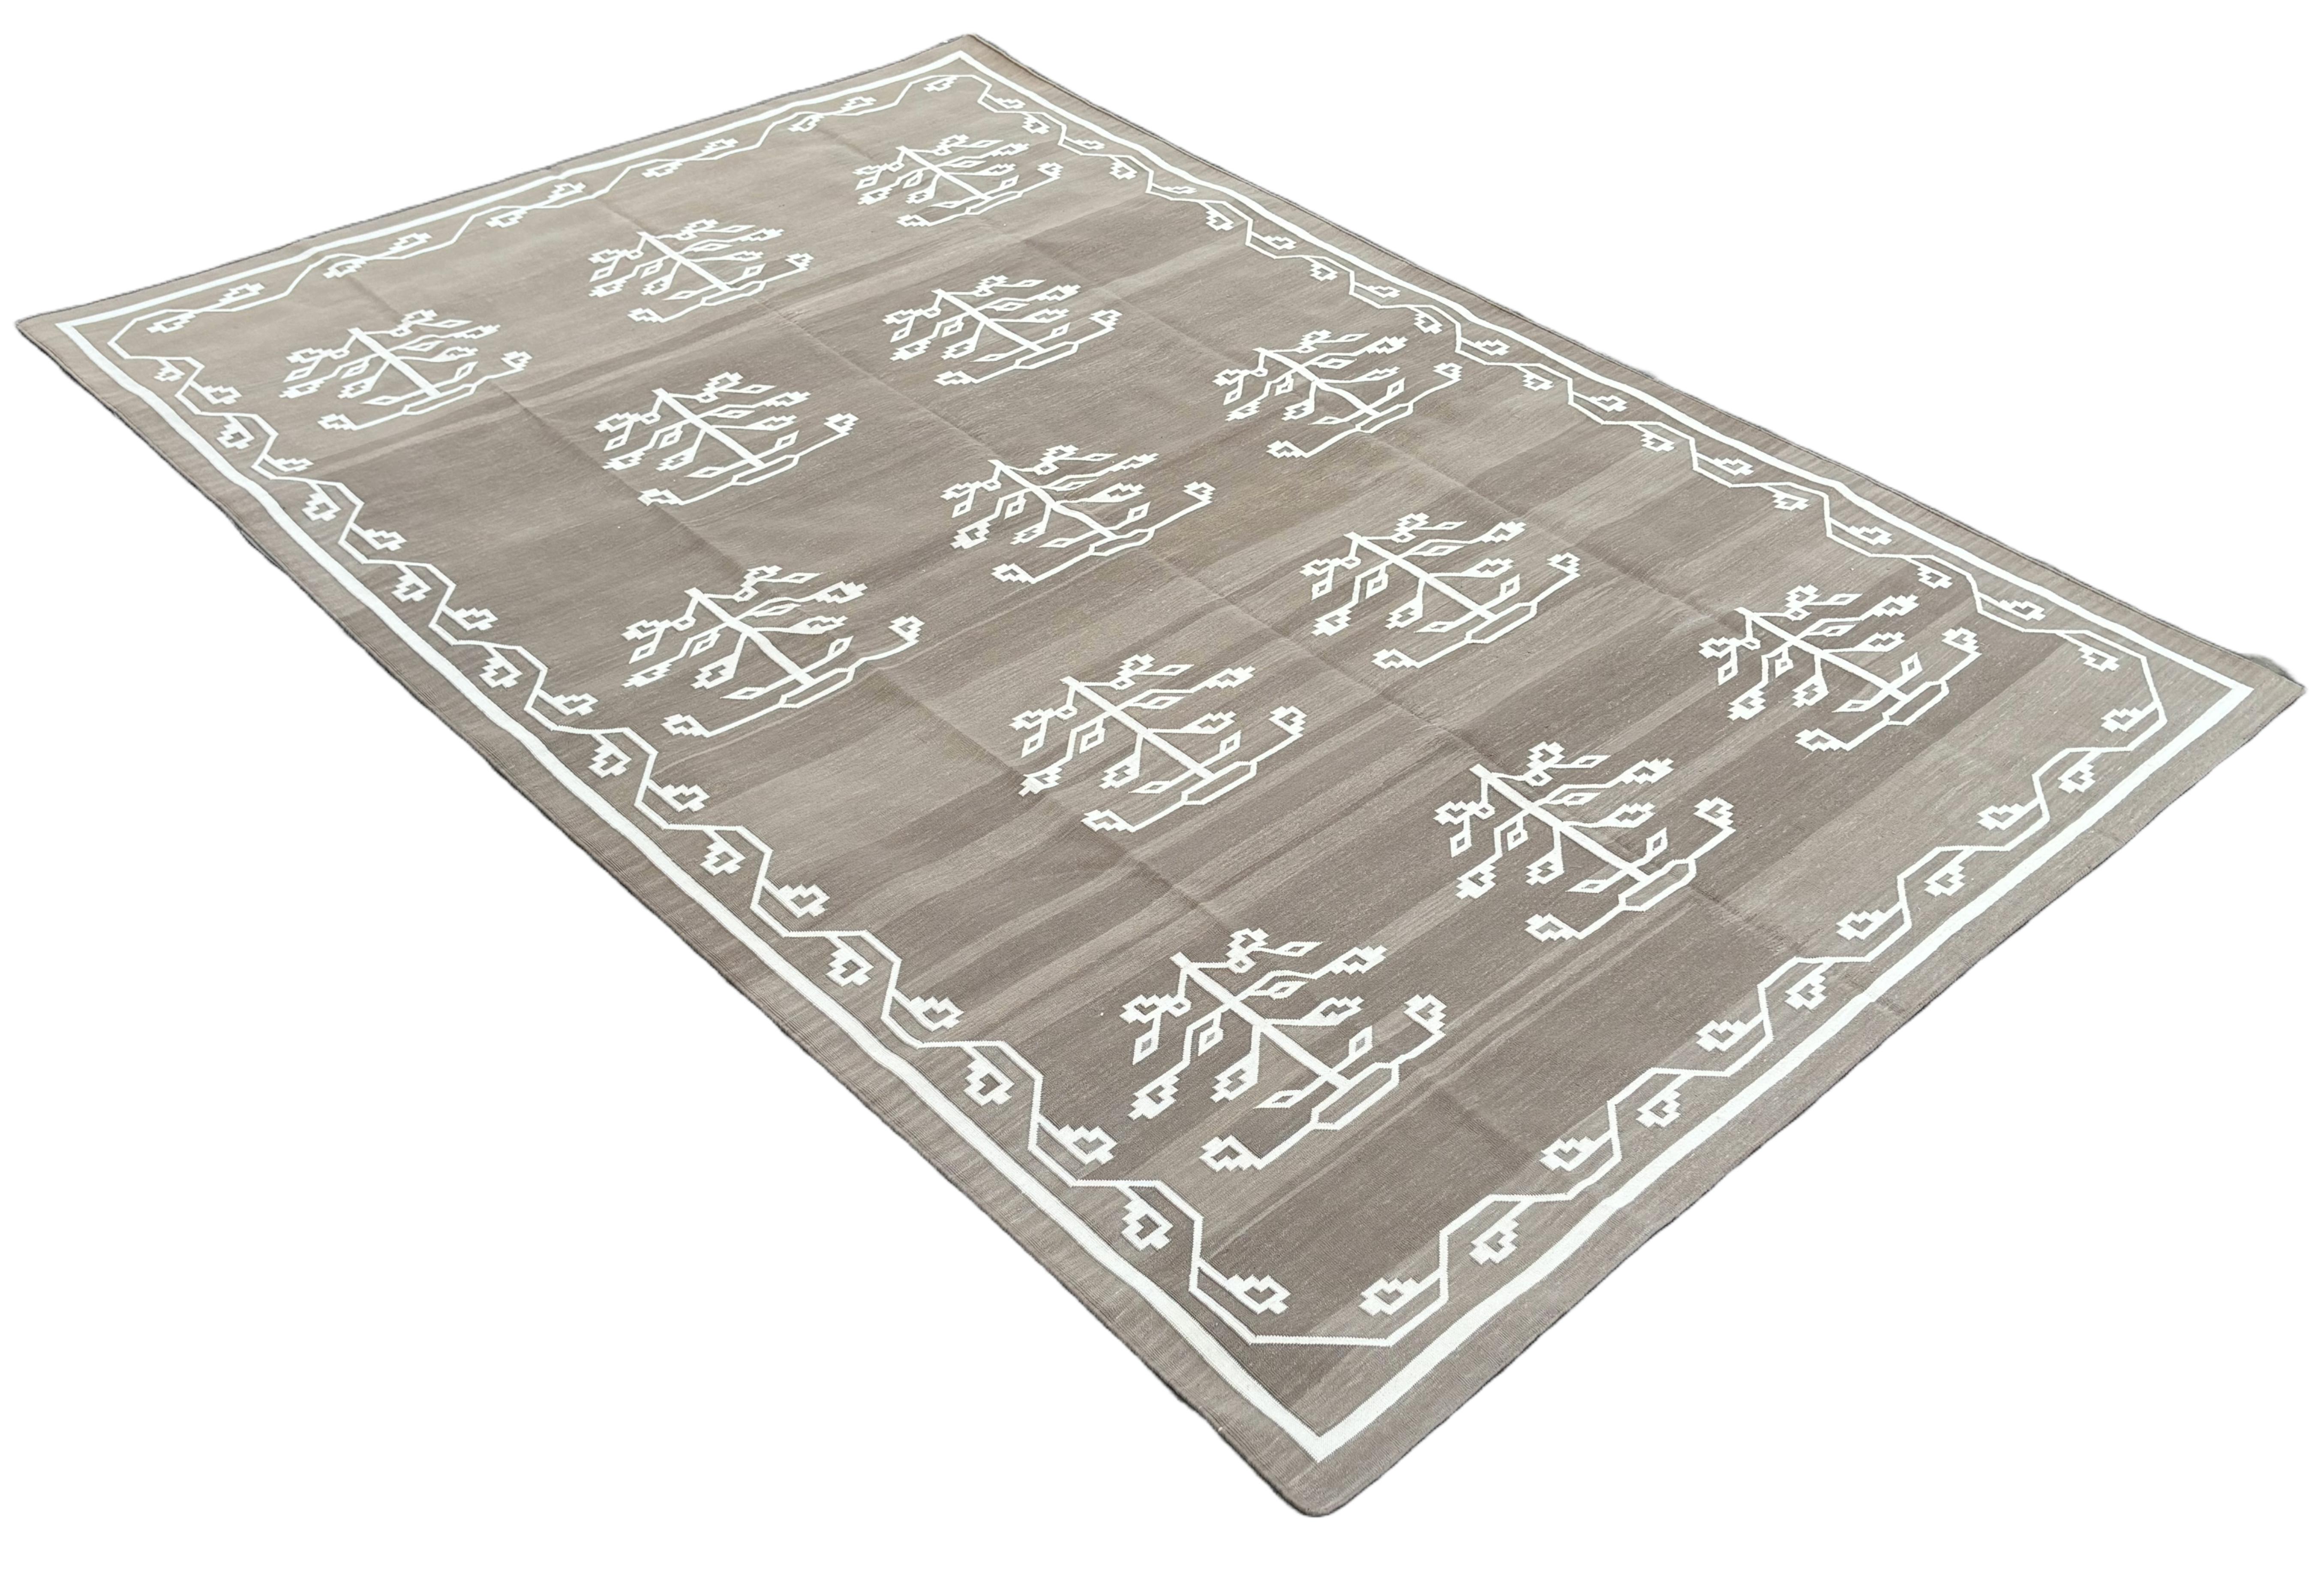 Cotton Vegetable Dyed Beige And White Leaf Pattern Indian Dhurrie Rug-7'x10' 
These special flat-weave dhurries are hand-woven with 15 ply 100% cotton yarn. Due to the special manufacturing techniques used to create our rugs, the size and color of